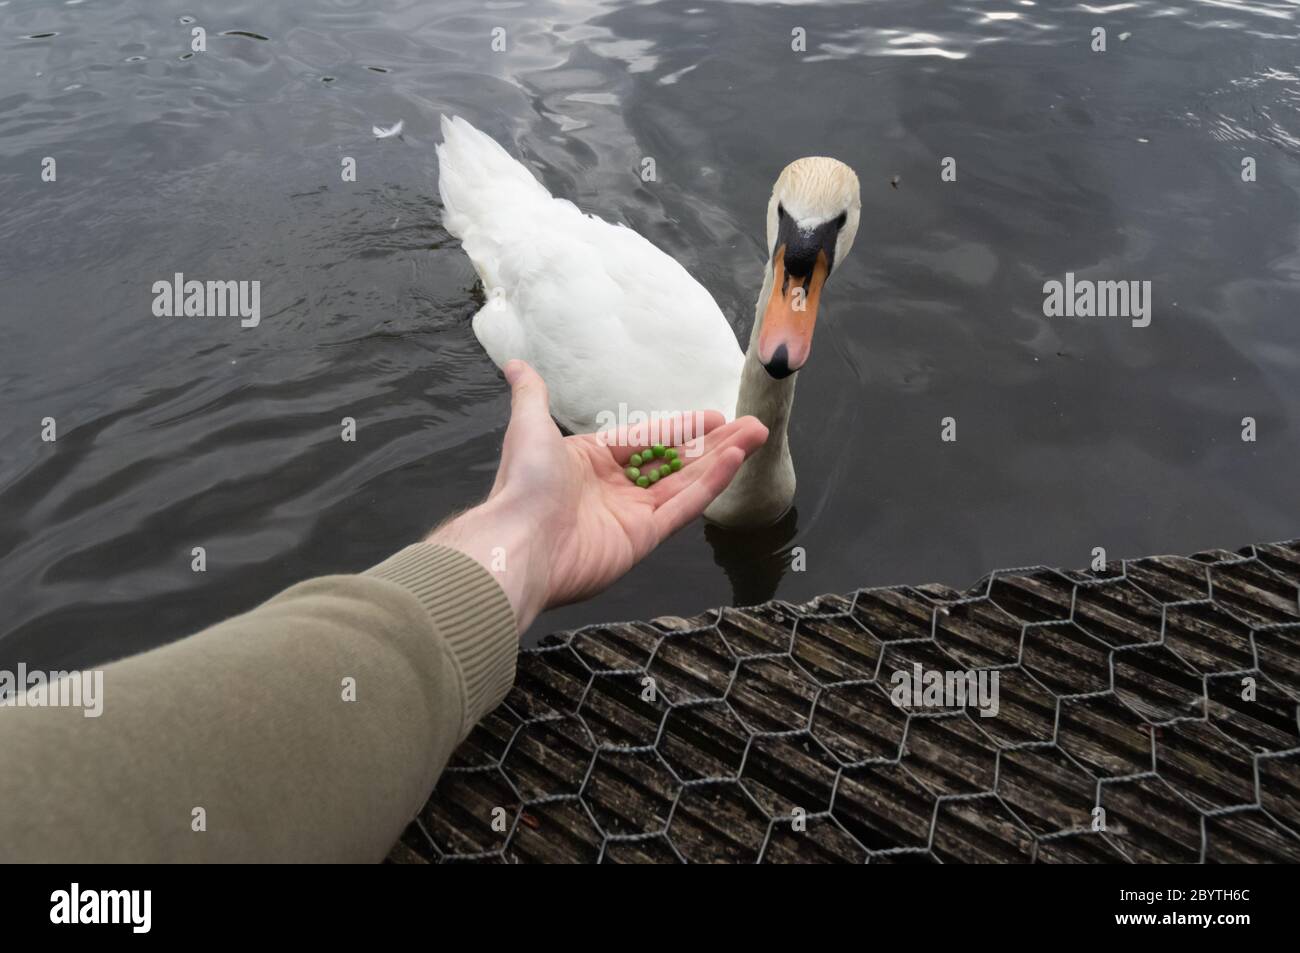 Person with outstretched hand offering peas to a mute swan, a healthier alternative to bread - feed, eat, eating, human interaction with animals Stock Photo